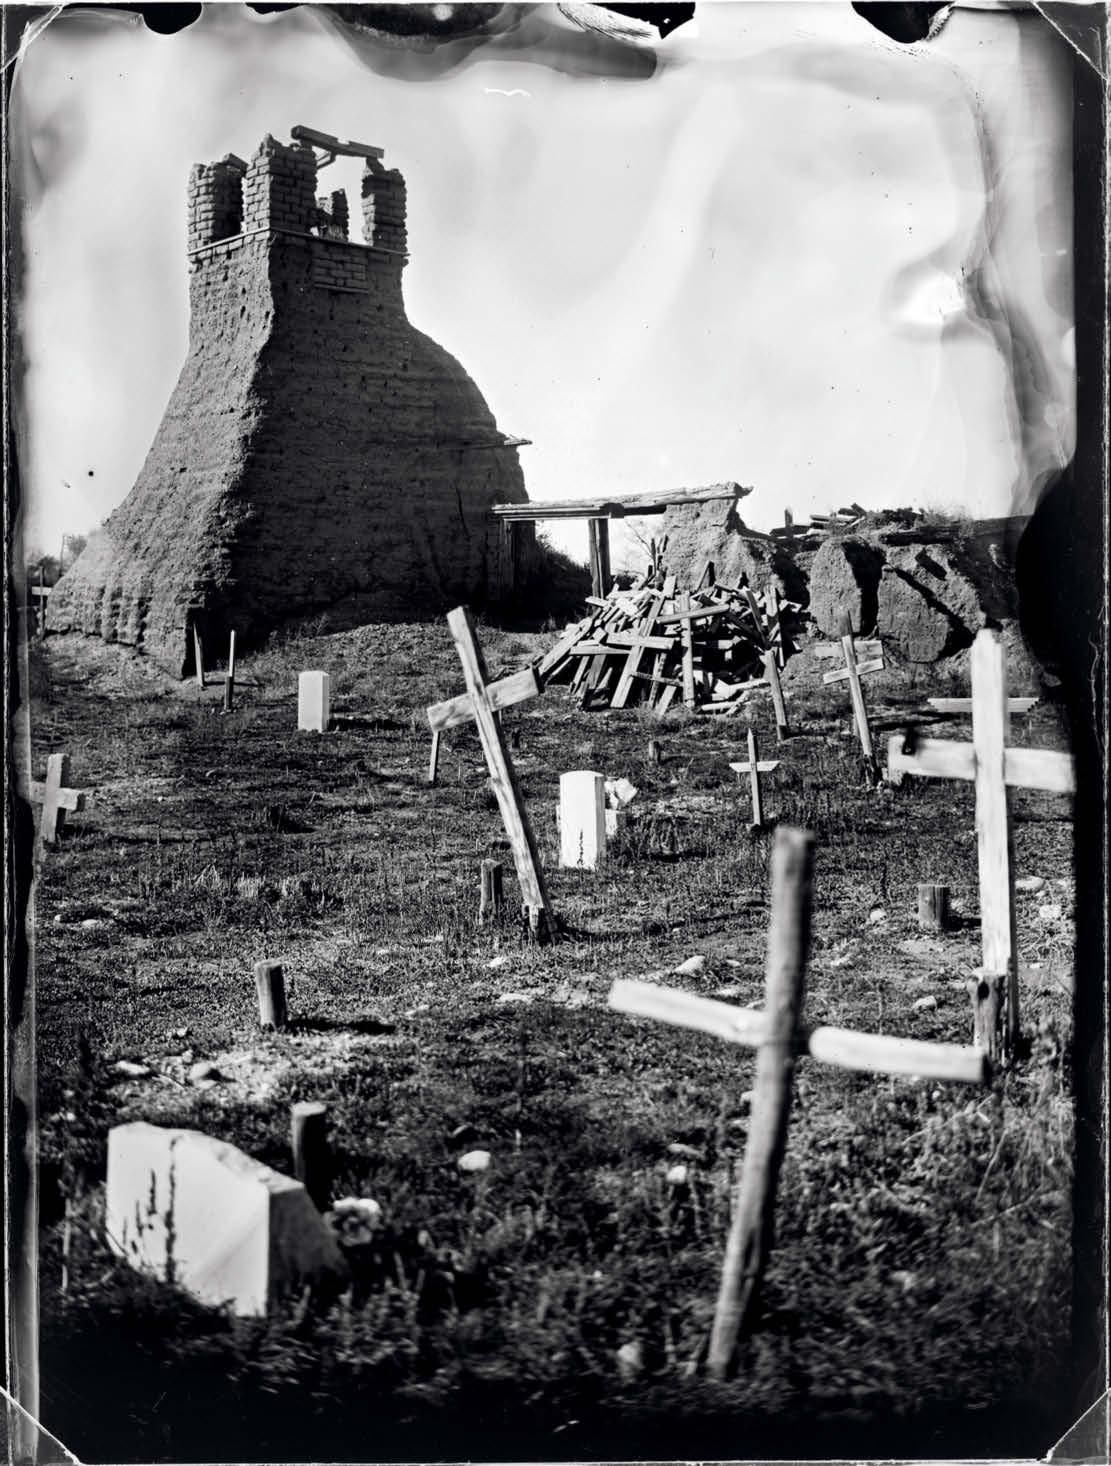 Ruins of San Geronimo Church, Taos, New Mexico. US troops attacked the church in 1847, killing 150 Hispanic and indigenous people seeking refuge inside. Image by Tomas Van Houtryve. New Mexico, 2018.